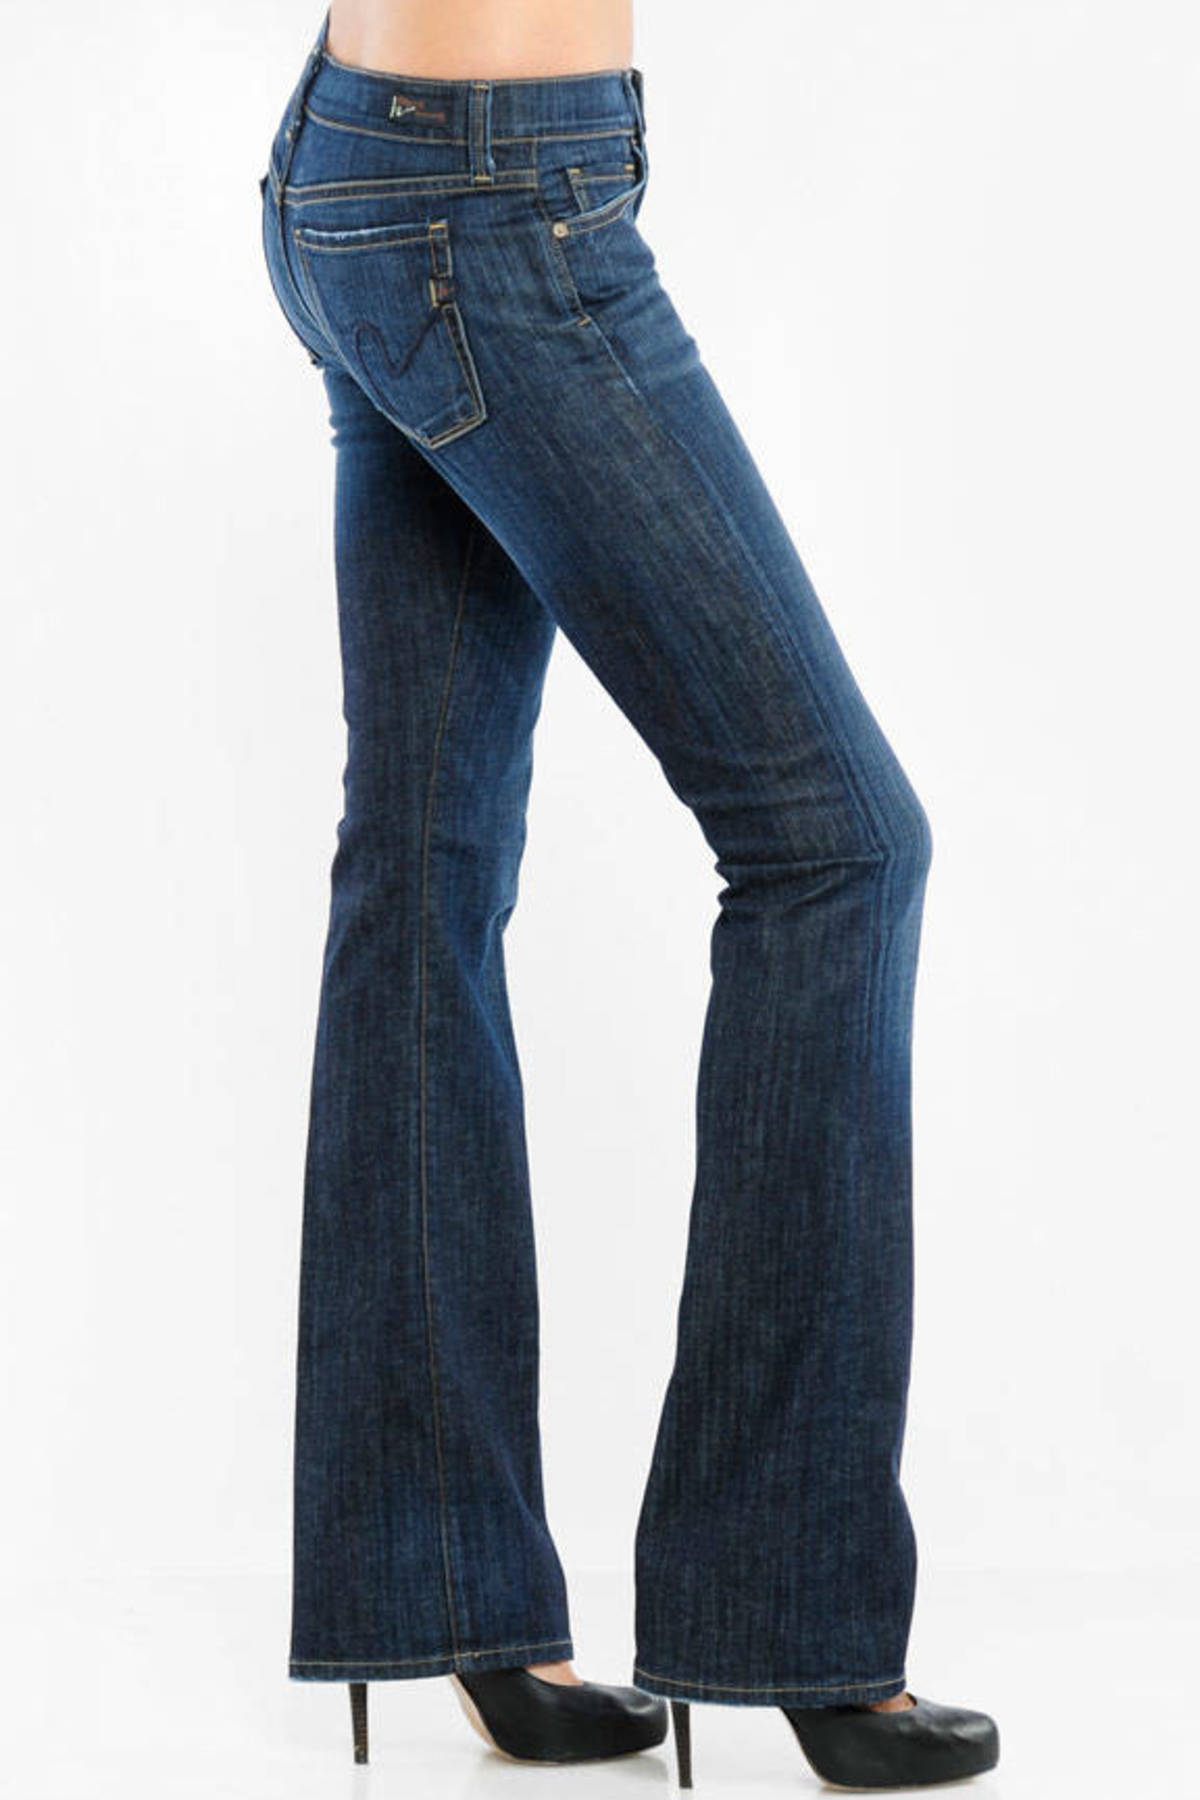 Kelly Bootcut Jeans in Pacific - $77 | Tobi US